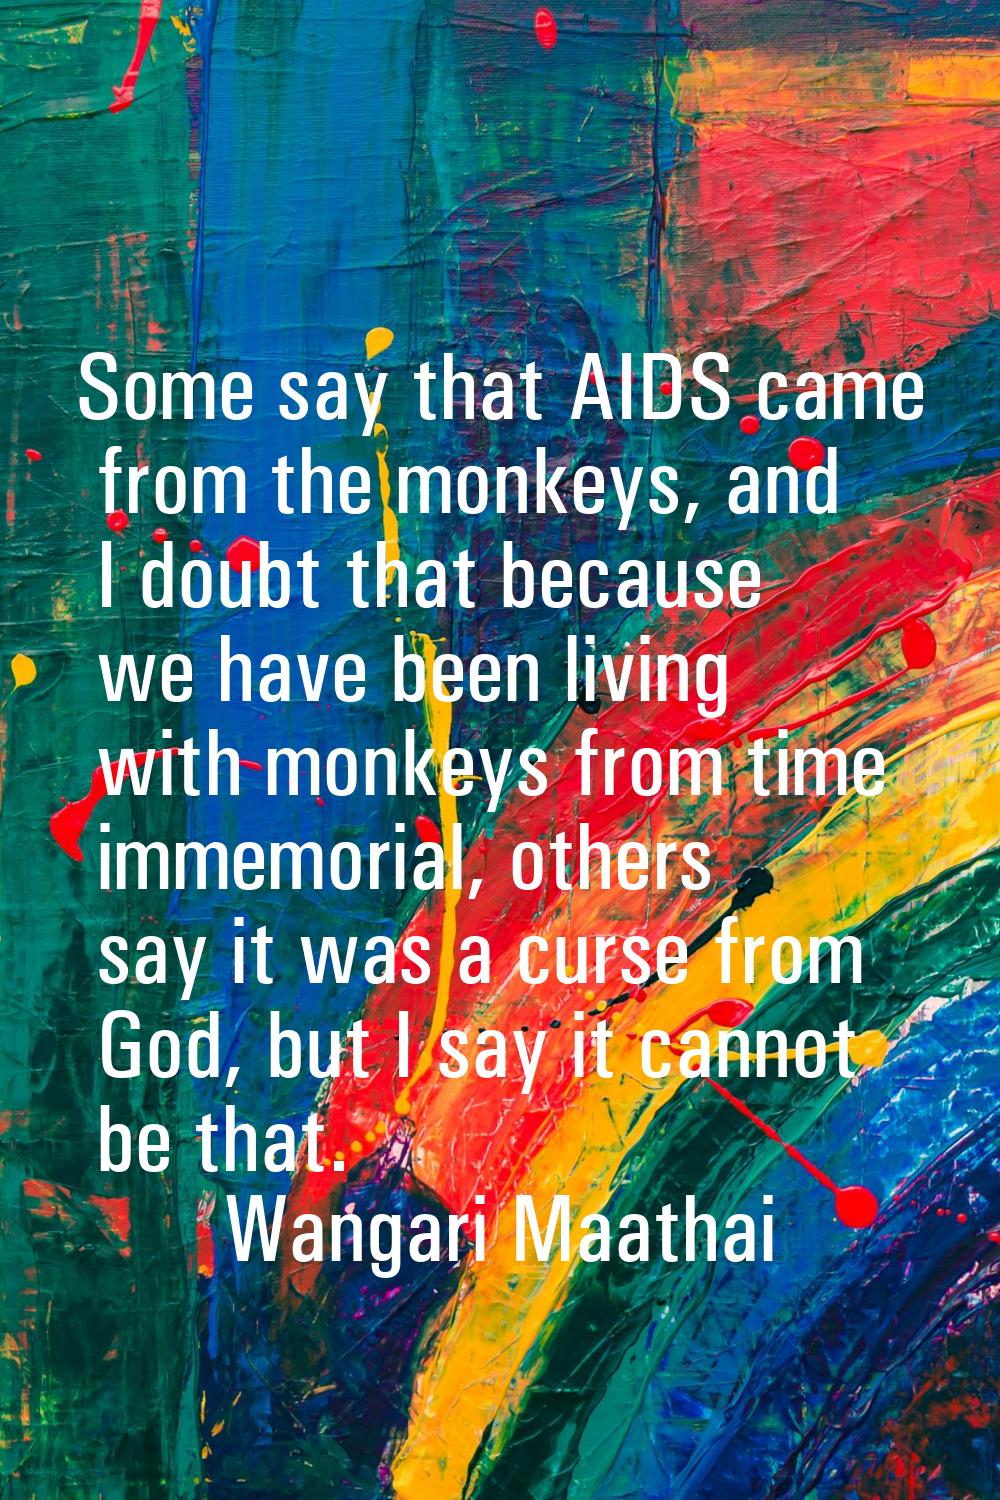 Some say that AIDS came from the monkeys, and I doubt that because we have been living with monkeys